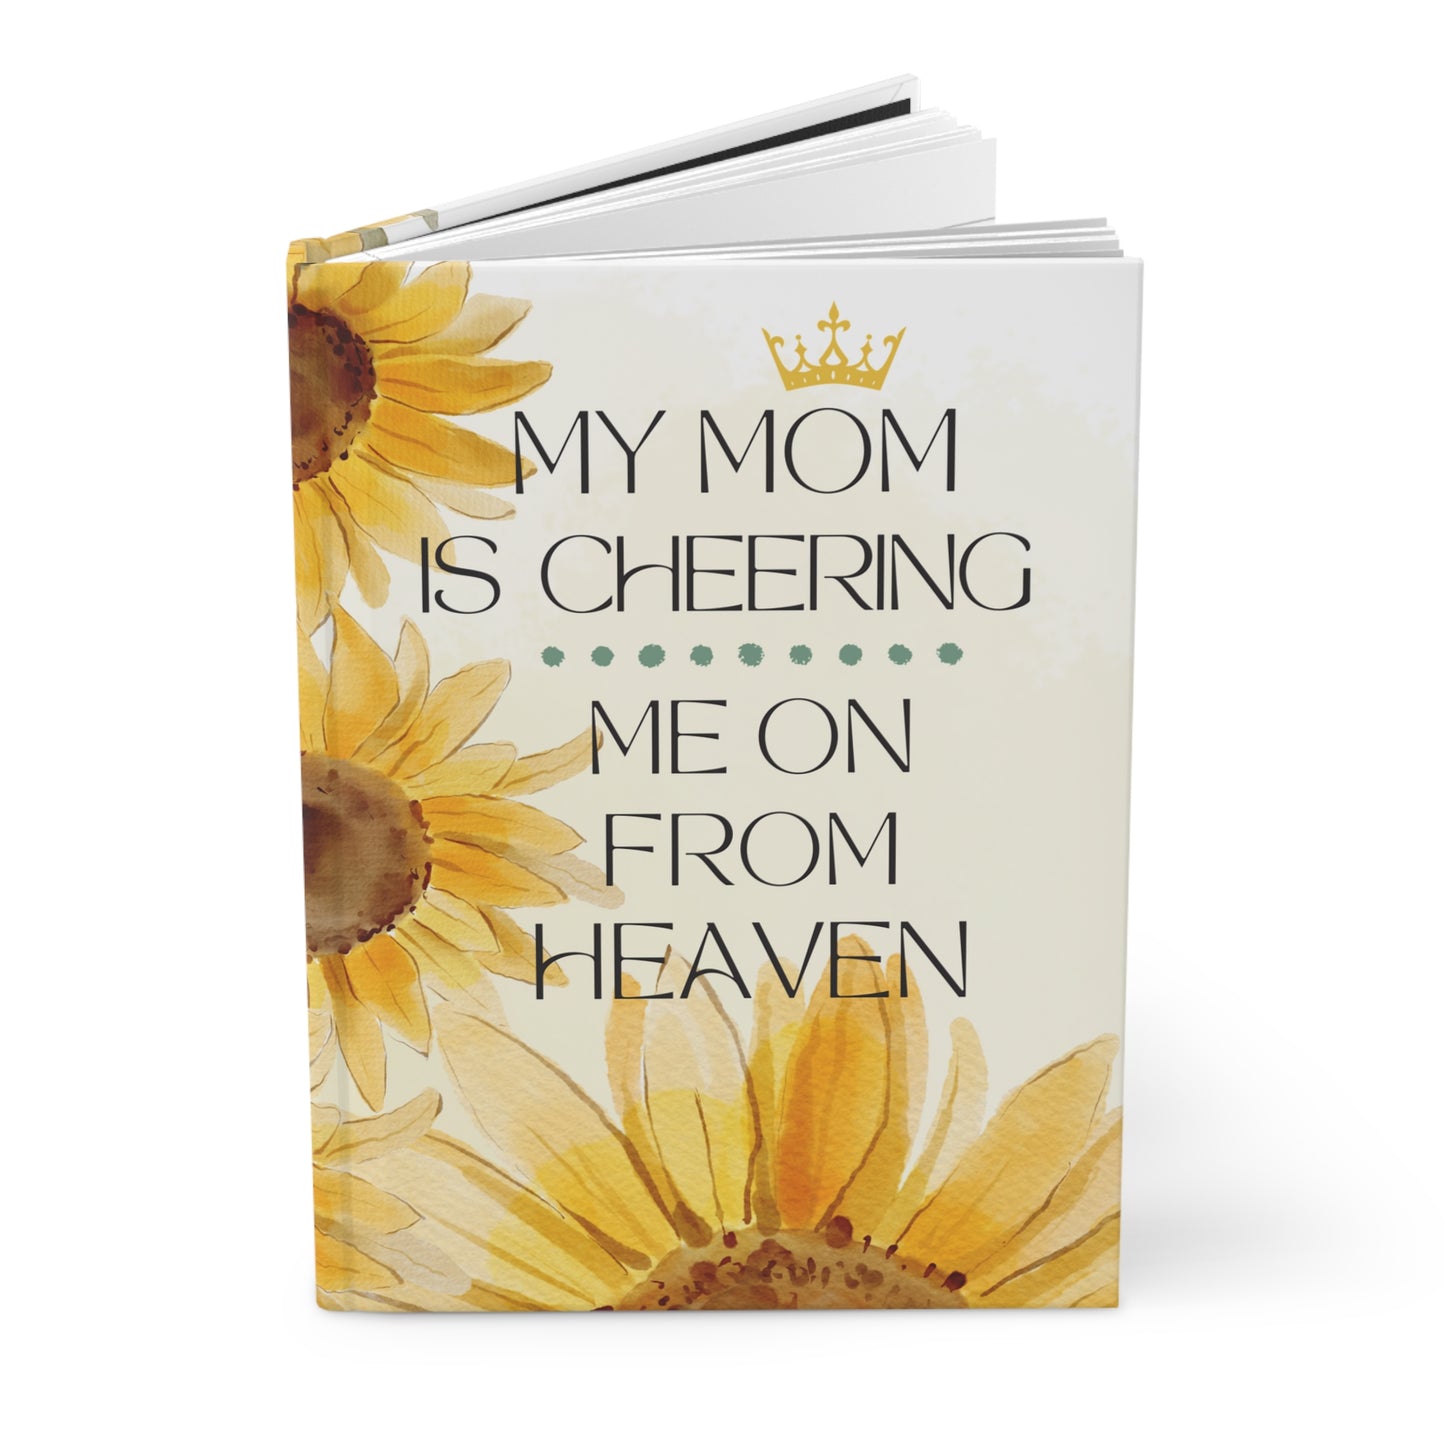 Grief Journal for Loss of Mom, Cheering Me On From Heaven